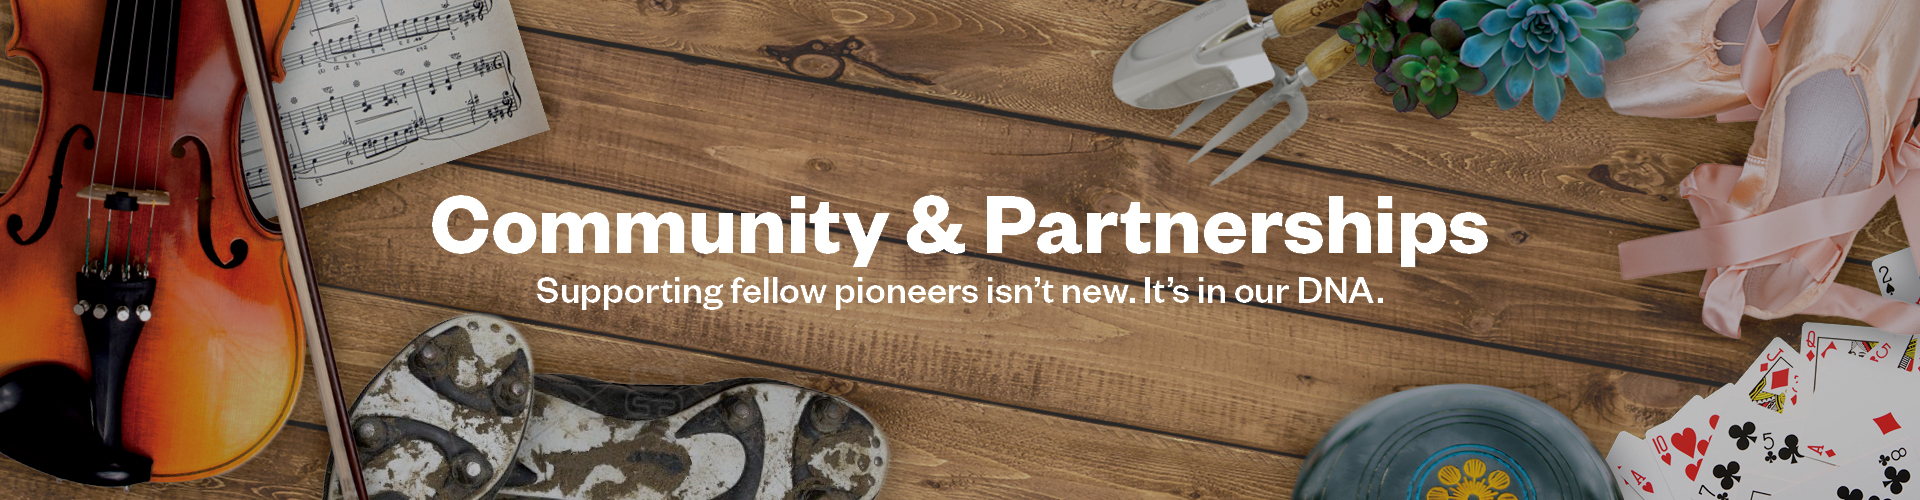 Community & Partnerships Website Banner 1920x500 (with text)